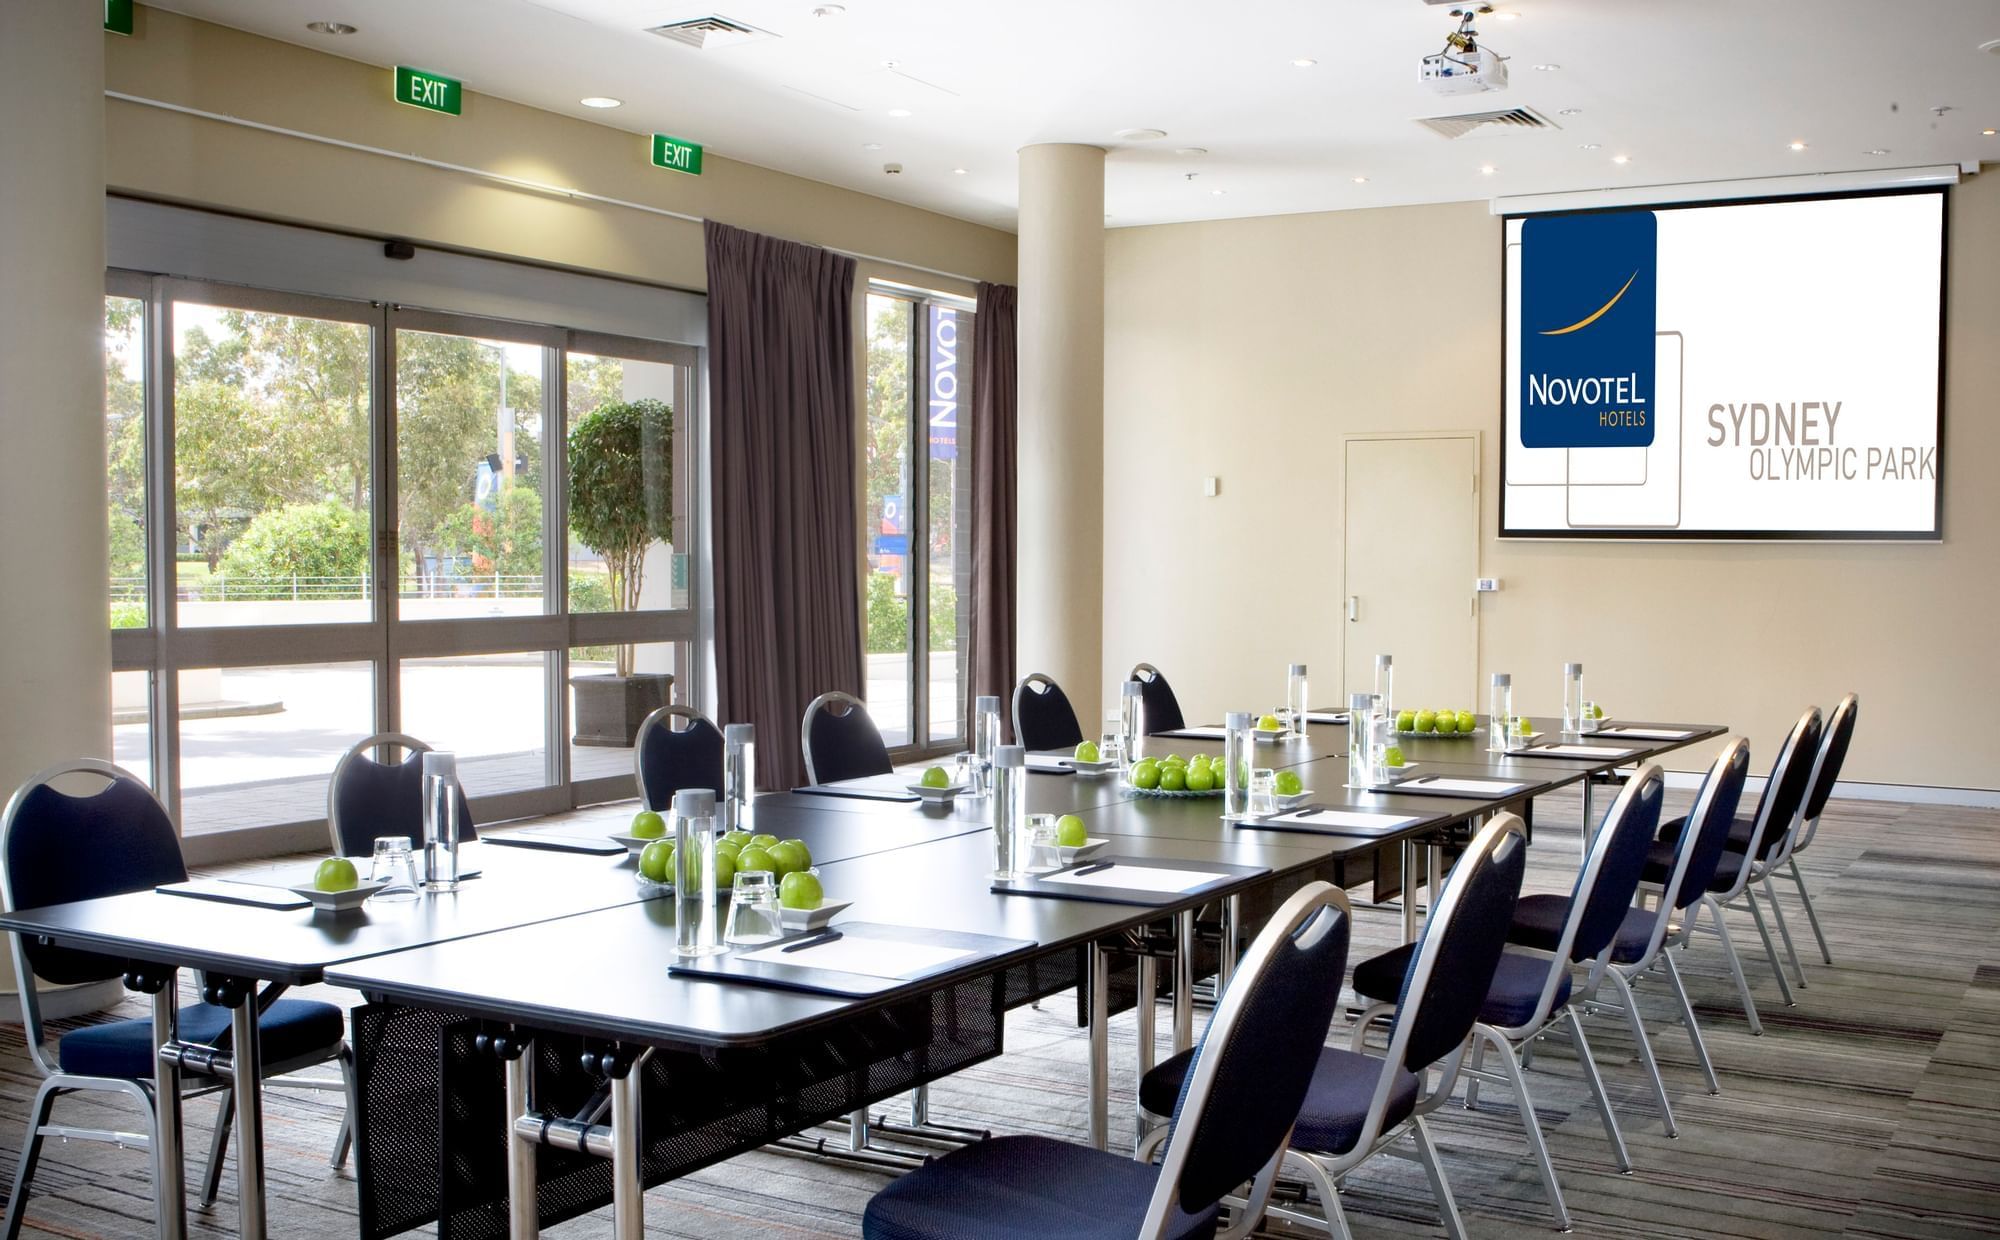 Conference room table set-up at Novotel Sydney Olympic Park